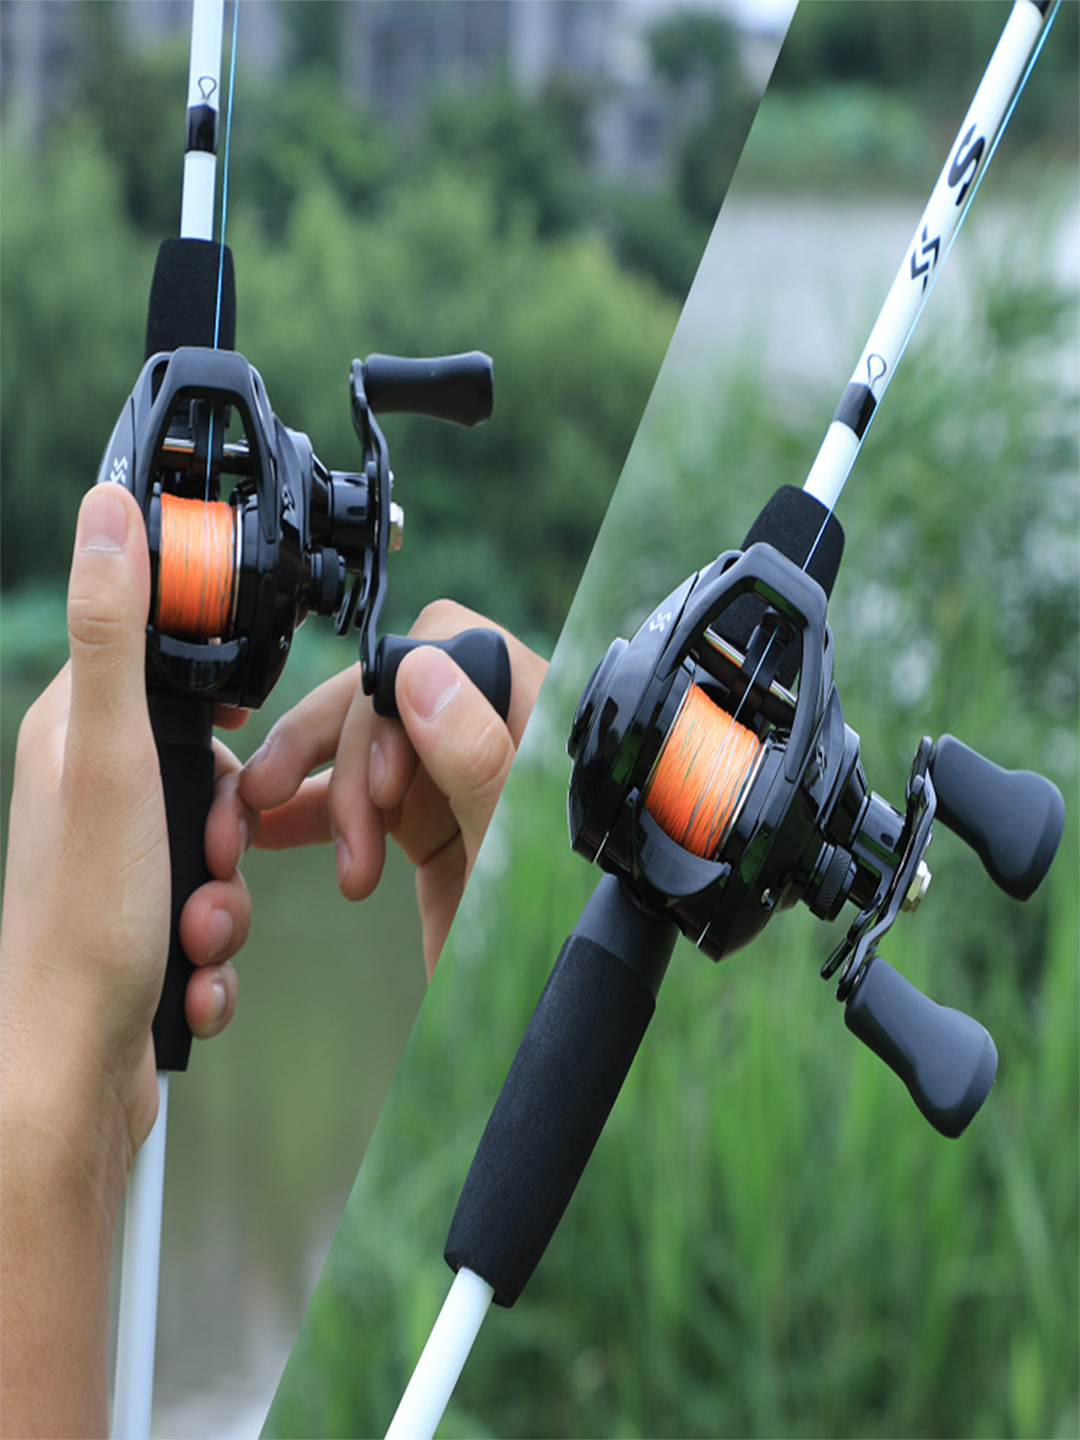 Profesional Fishing Rod and Reel for left and right-handed fishers